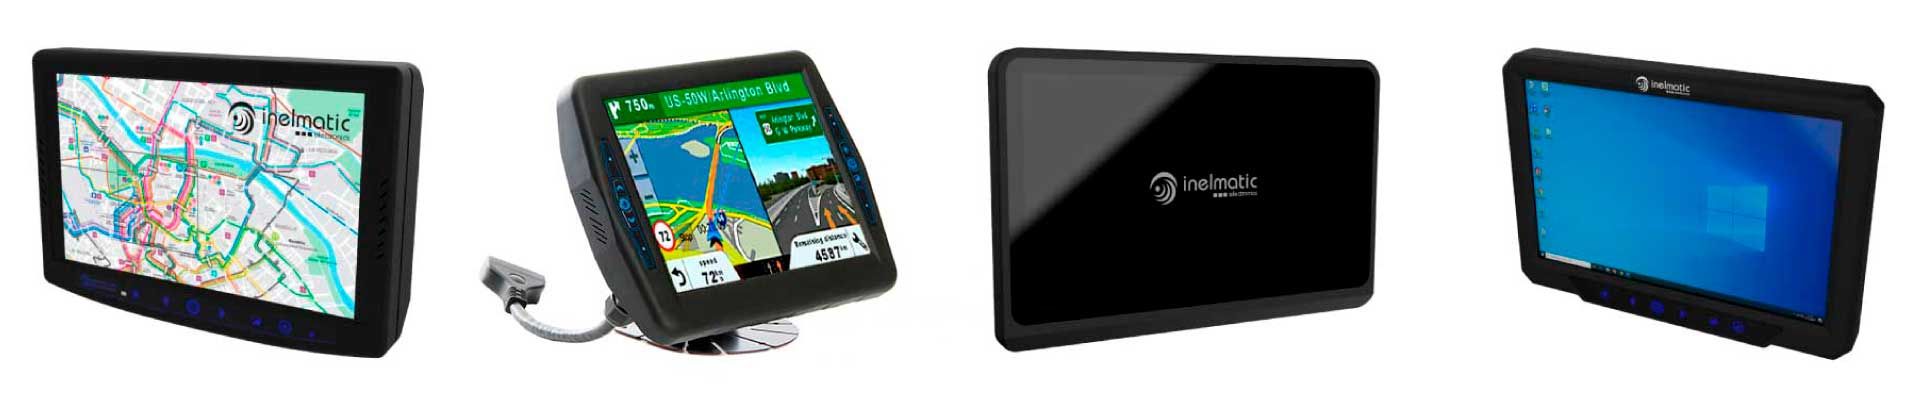 Bus rugged and embedded displays - Inelmatic 